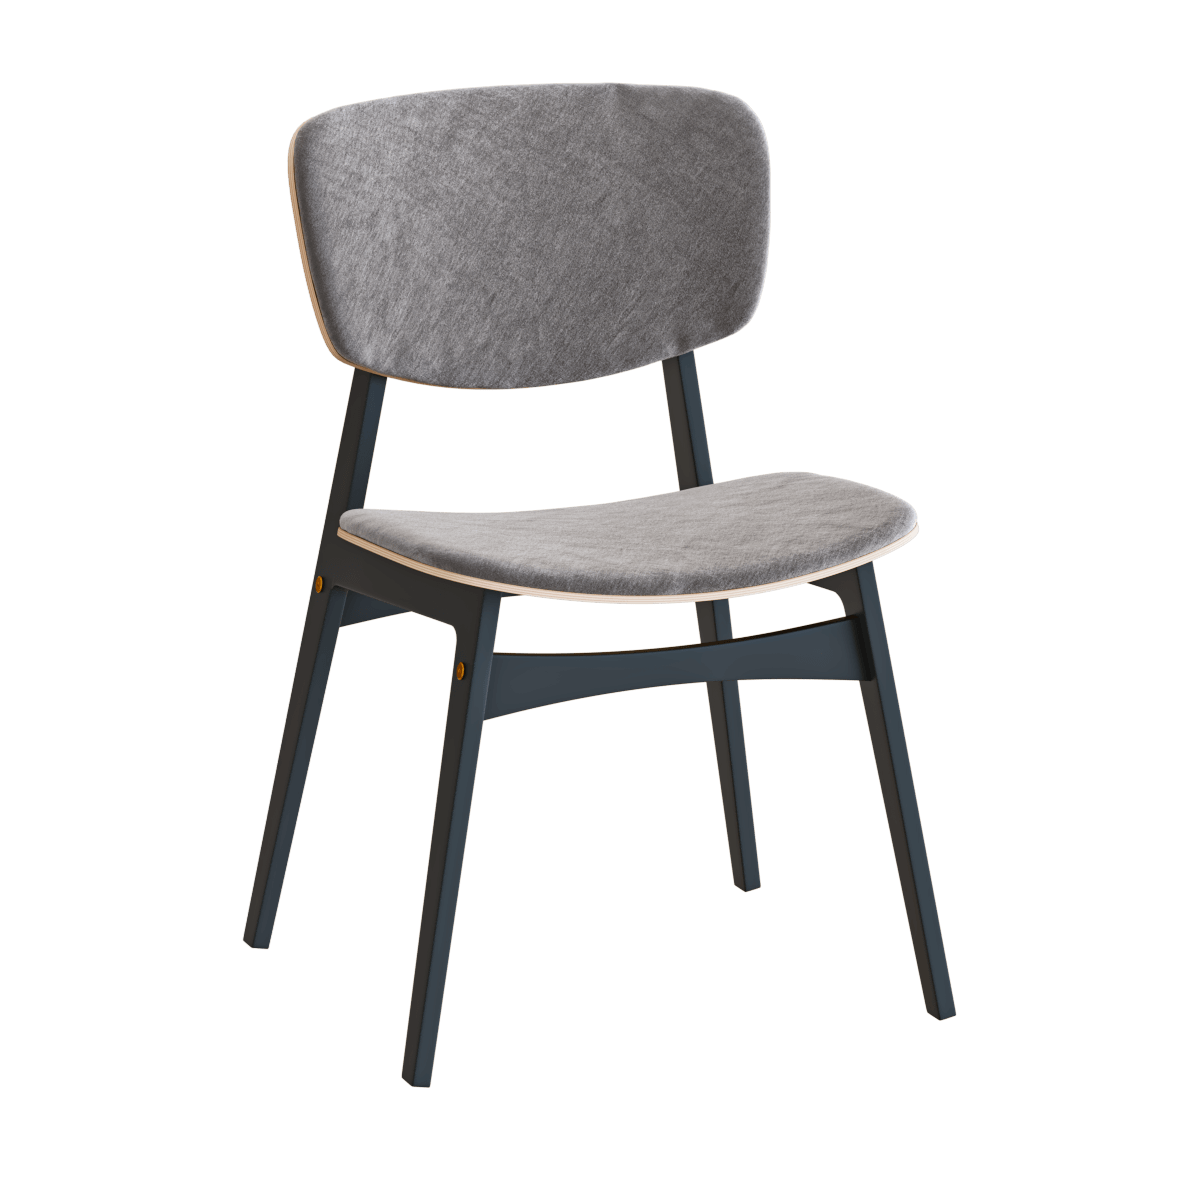 Soft chair, The IDEA - Download the 3D Model (25833) | zeelproject.com